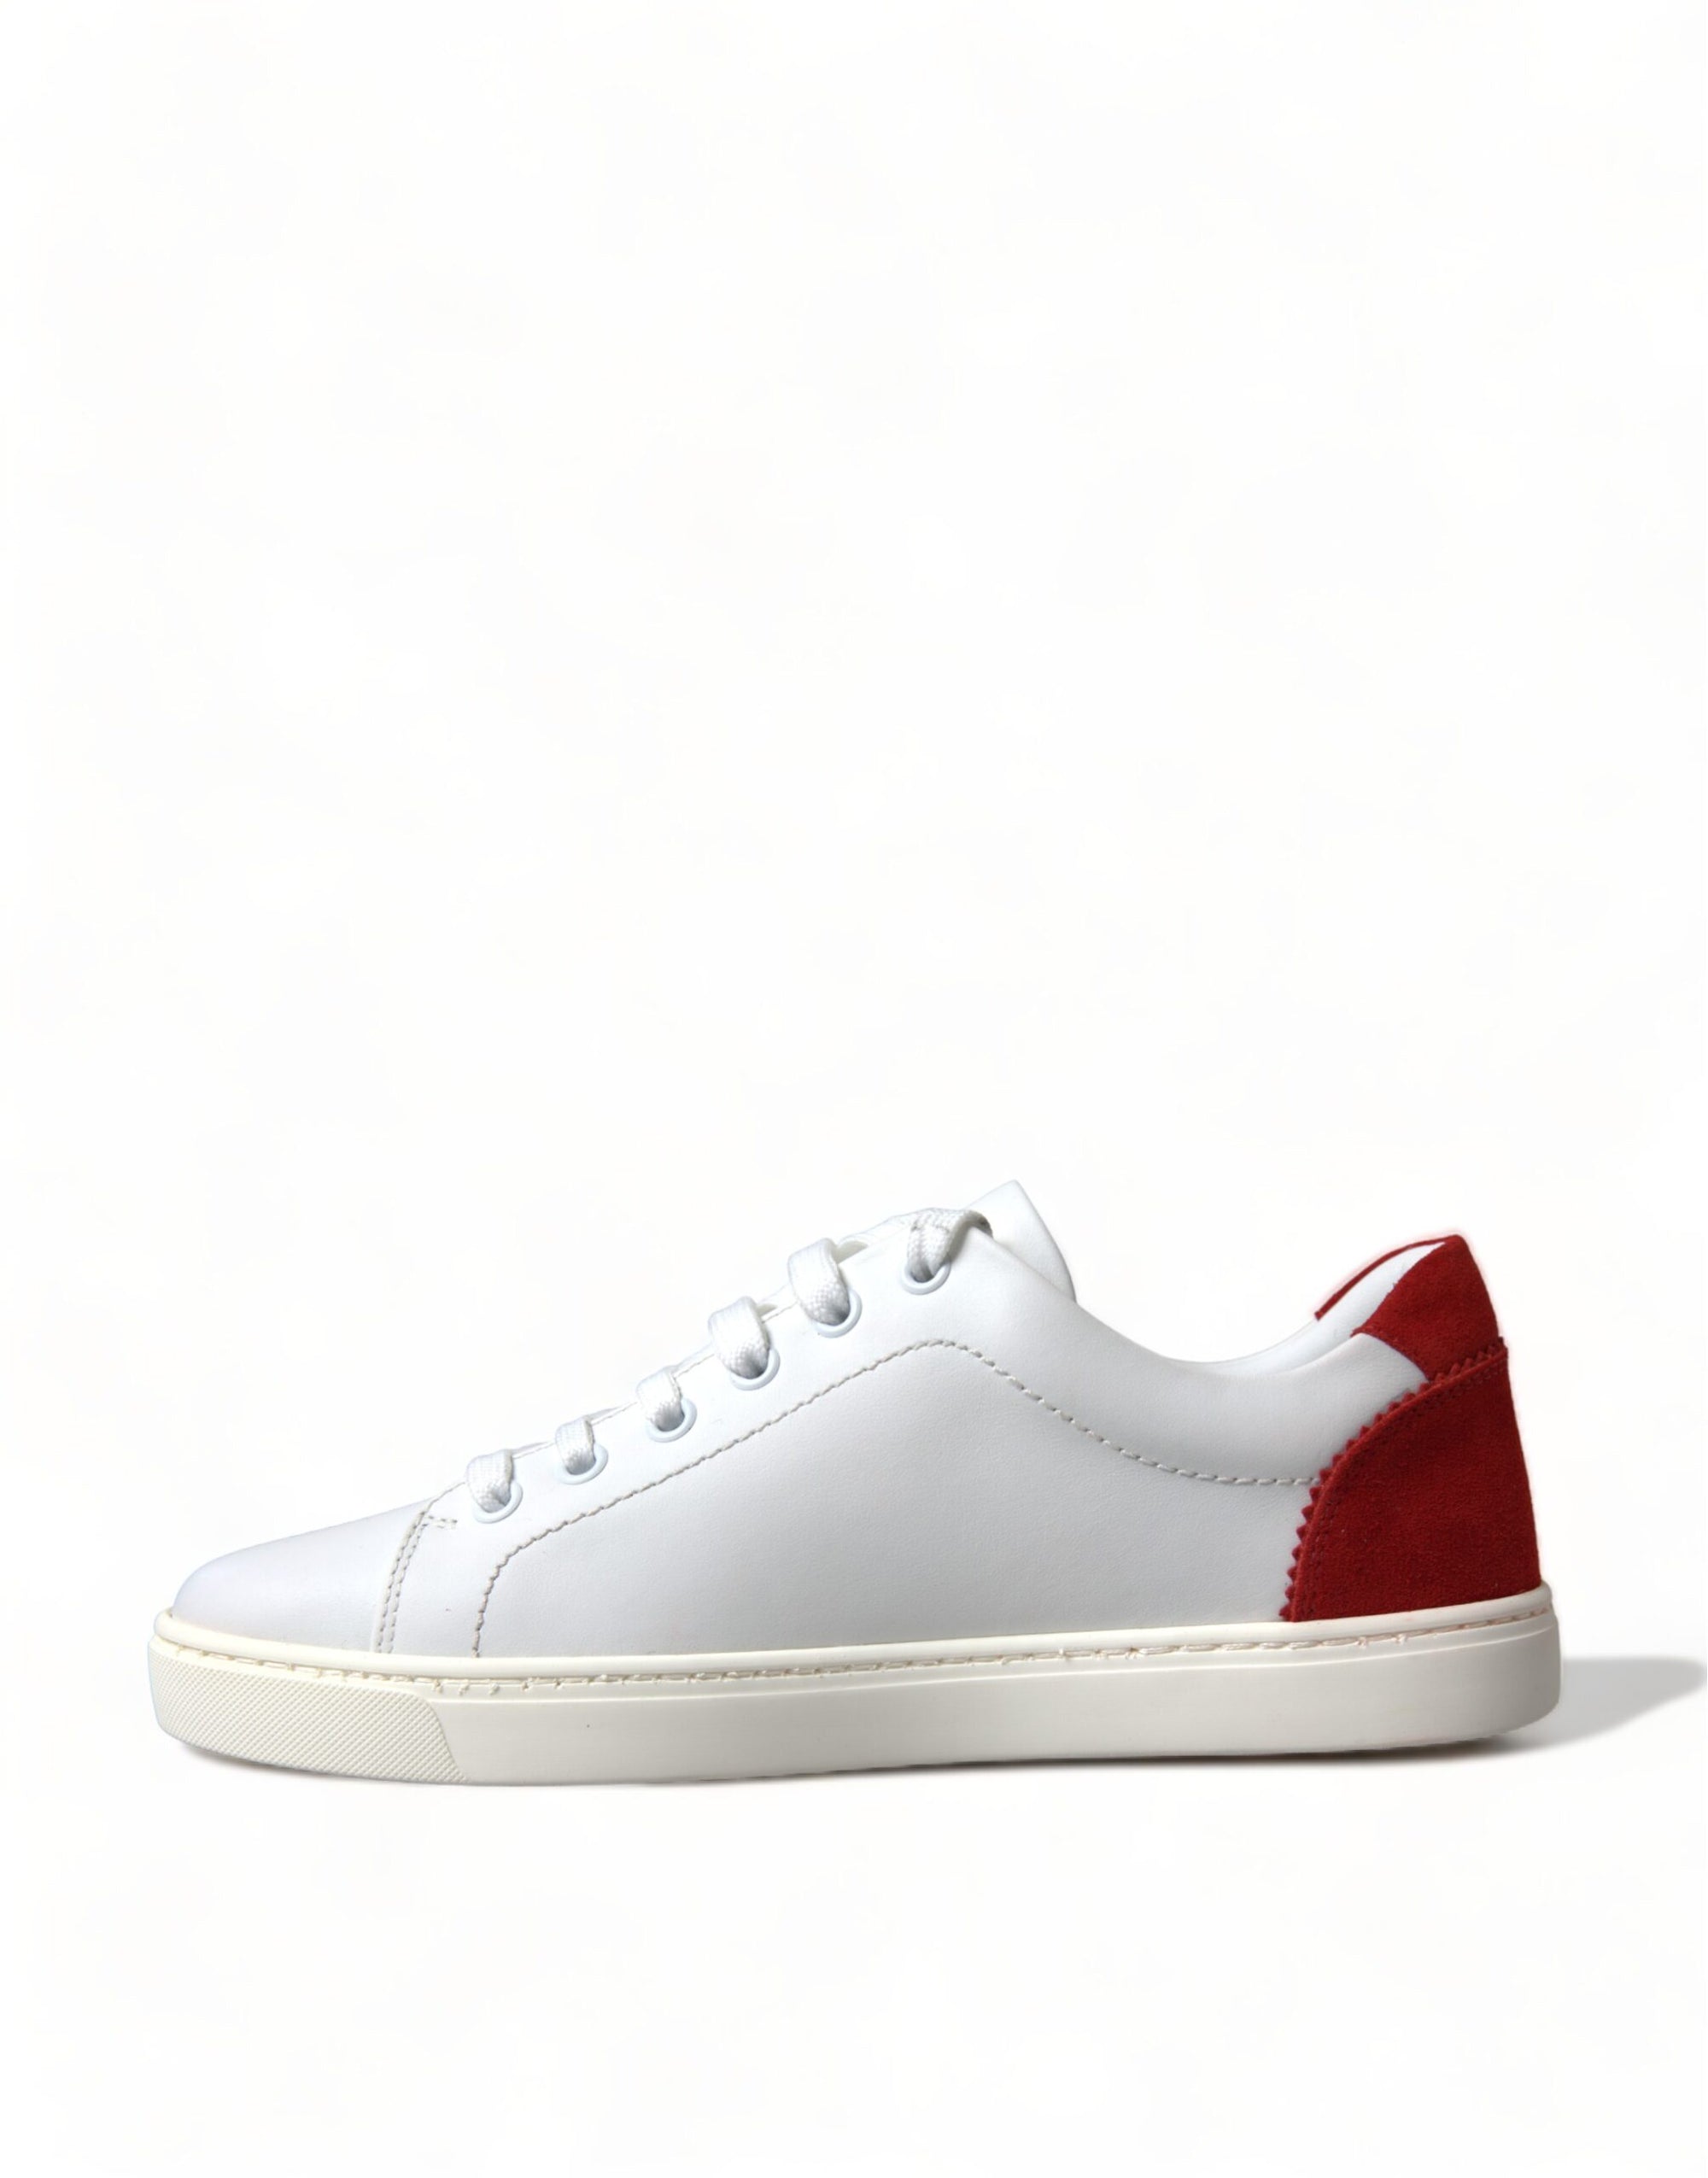 Chic White Leather Sneakers with Red Accents